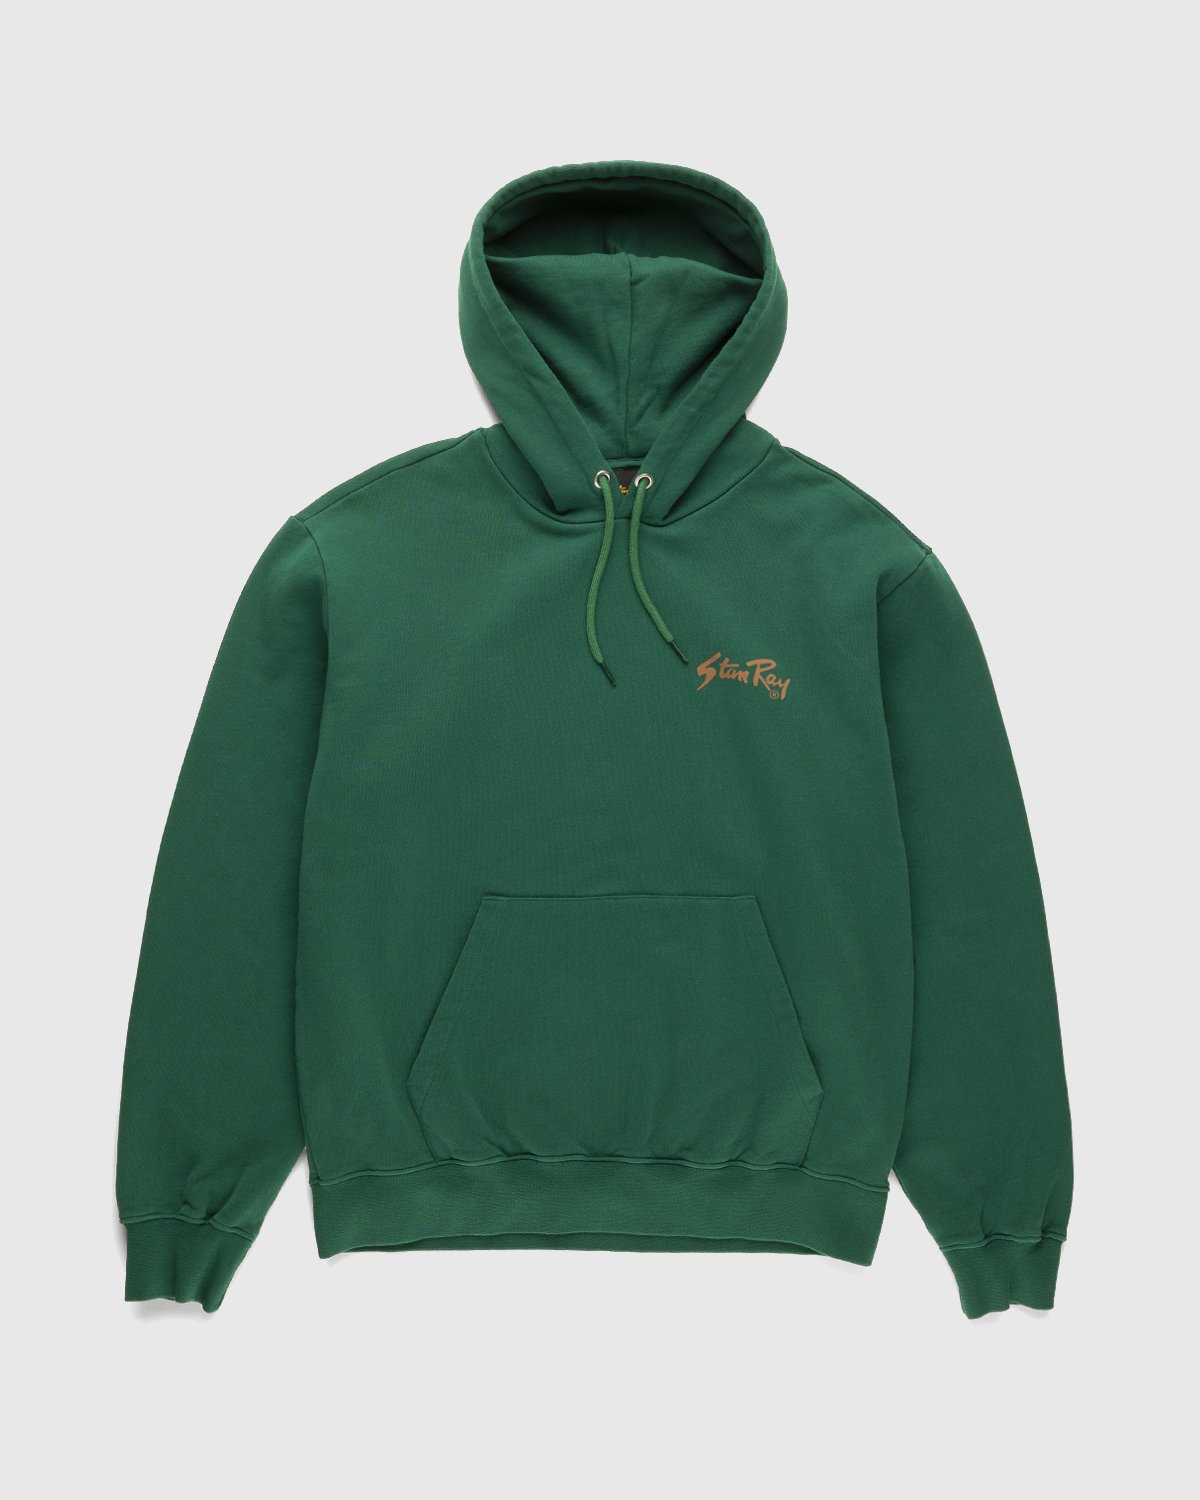 Stan Ray - Stan Hoodie Ivy Green - Clothing - Green - Image 1